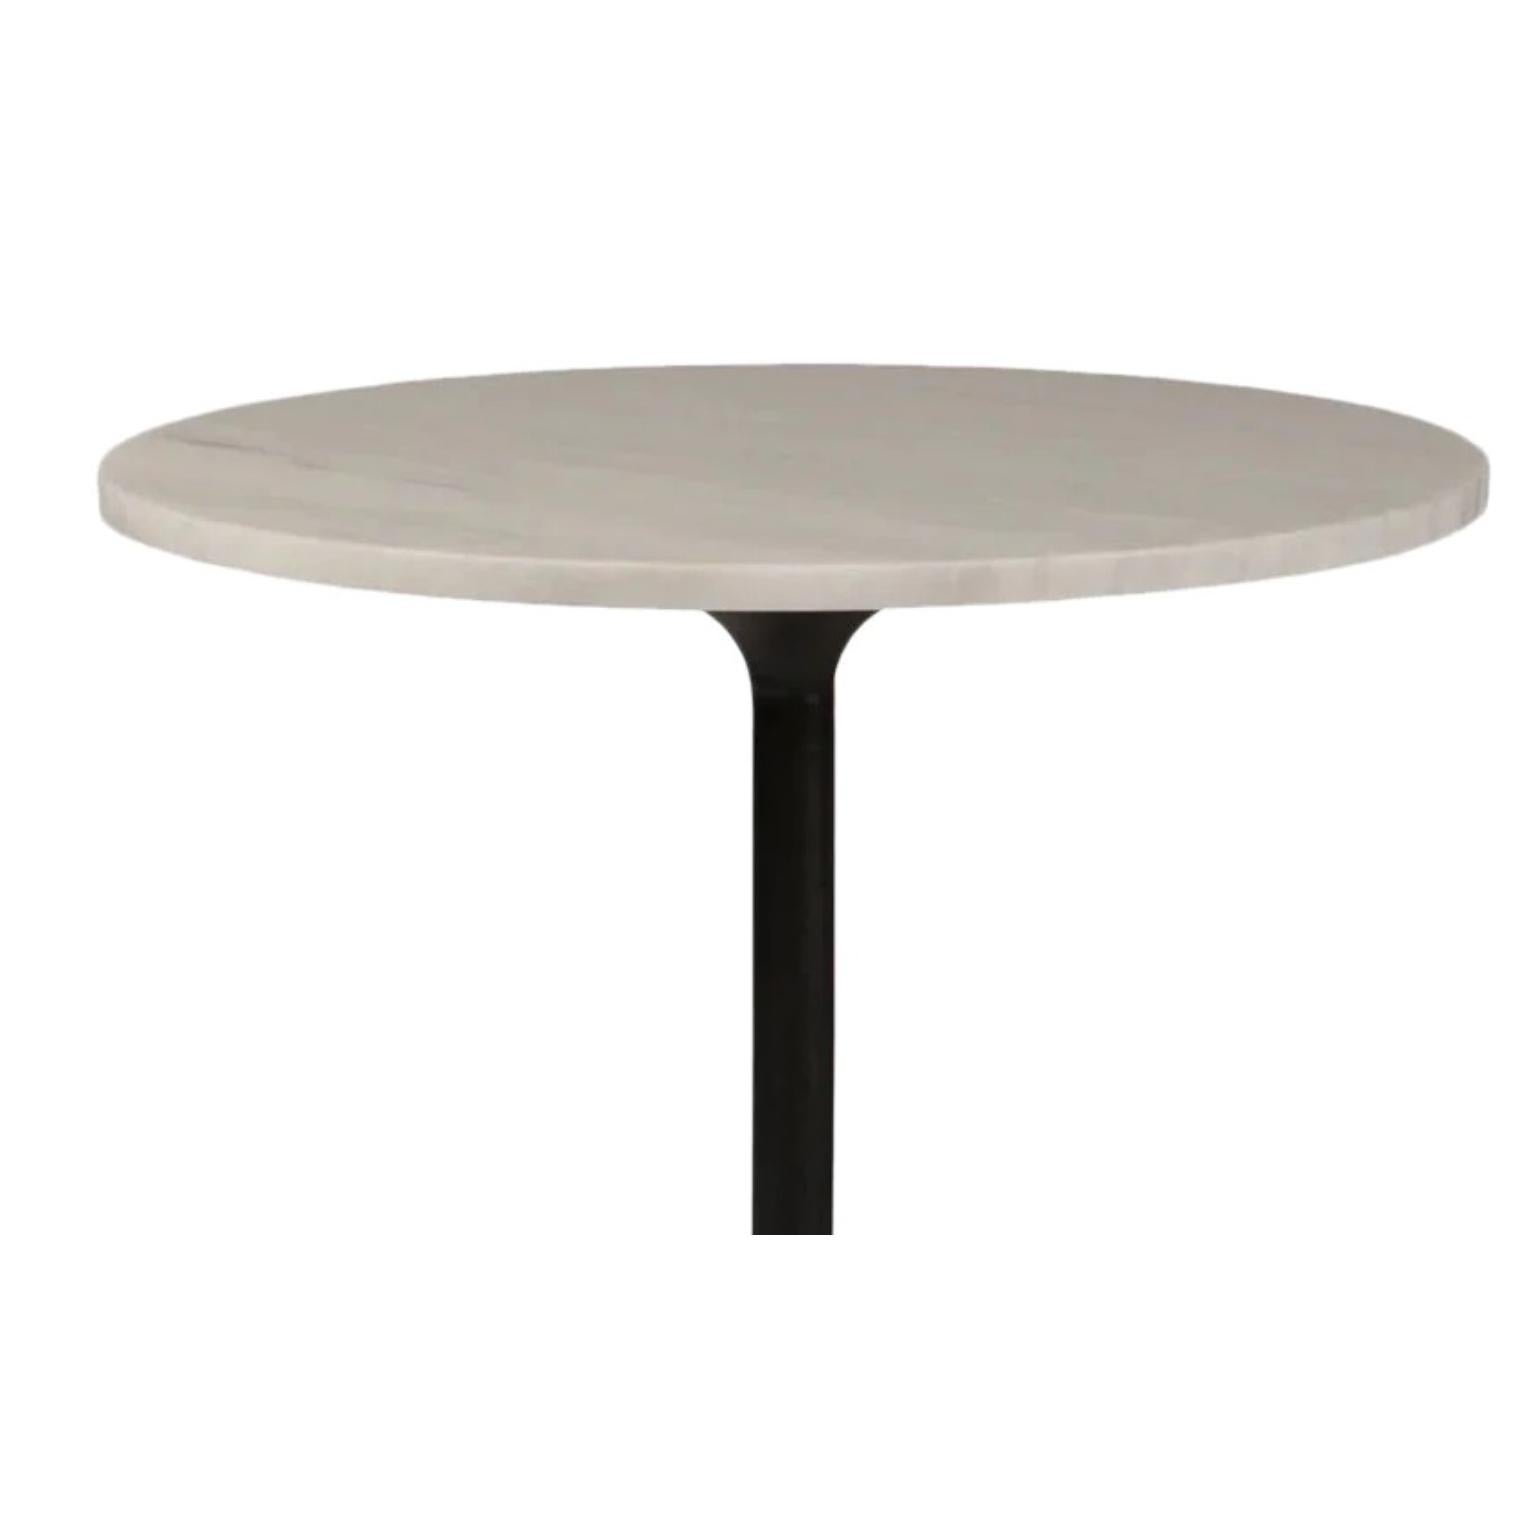 Maiden Café Table by NORR11
Dimensions: Ø 65 x H 70 cm.
Materials: Matte black iron and white marble.

The table legs are not suitable for outdoor use. The legs and the table top can be sold separately. Please contact us. 

NORR11 is a design